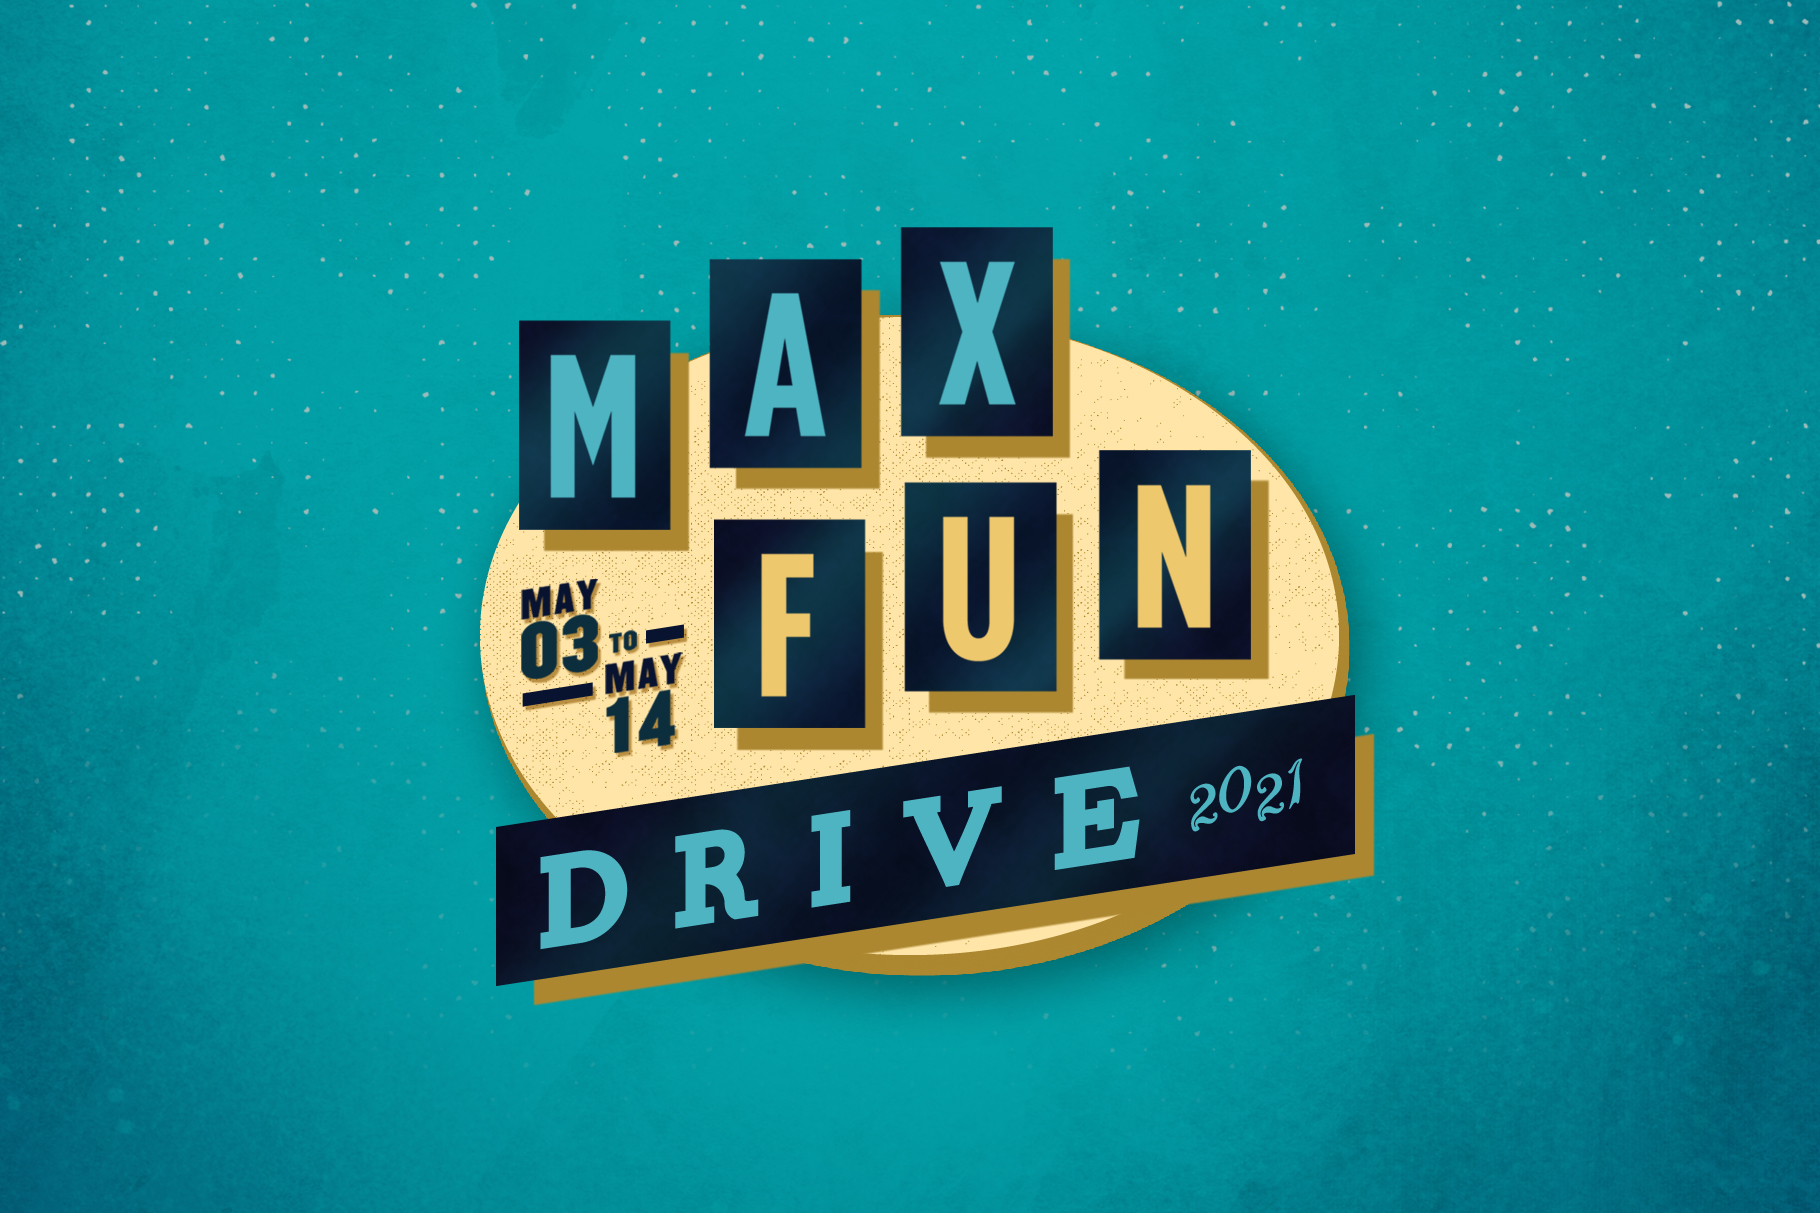 The text “MAX FUN DRIVE 20201” is written on a sign resembling an old drive-in sign. To the left is the additional text “May 03 to May 14”.